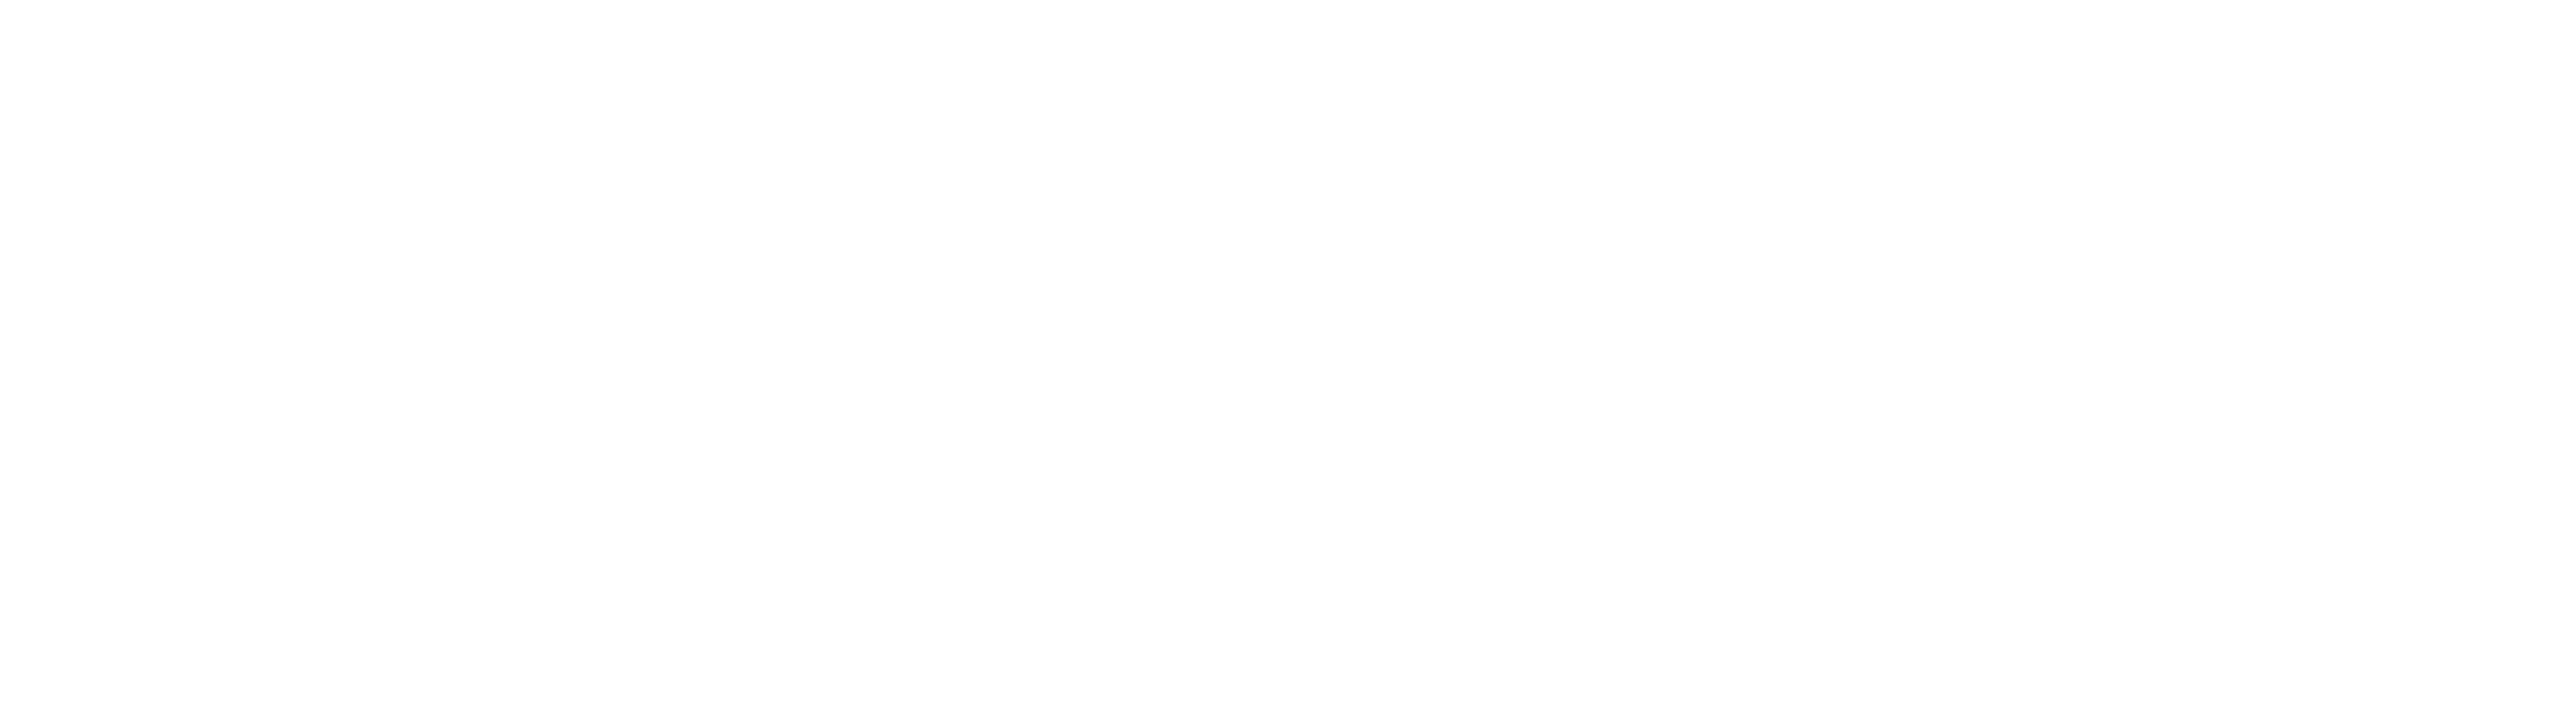 Primary Global